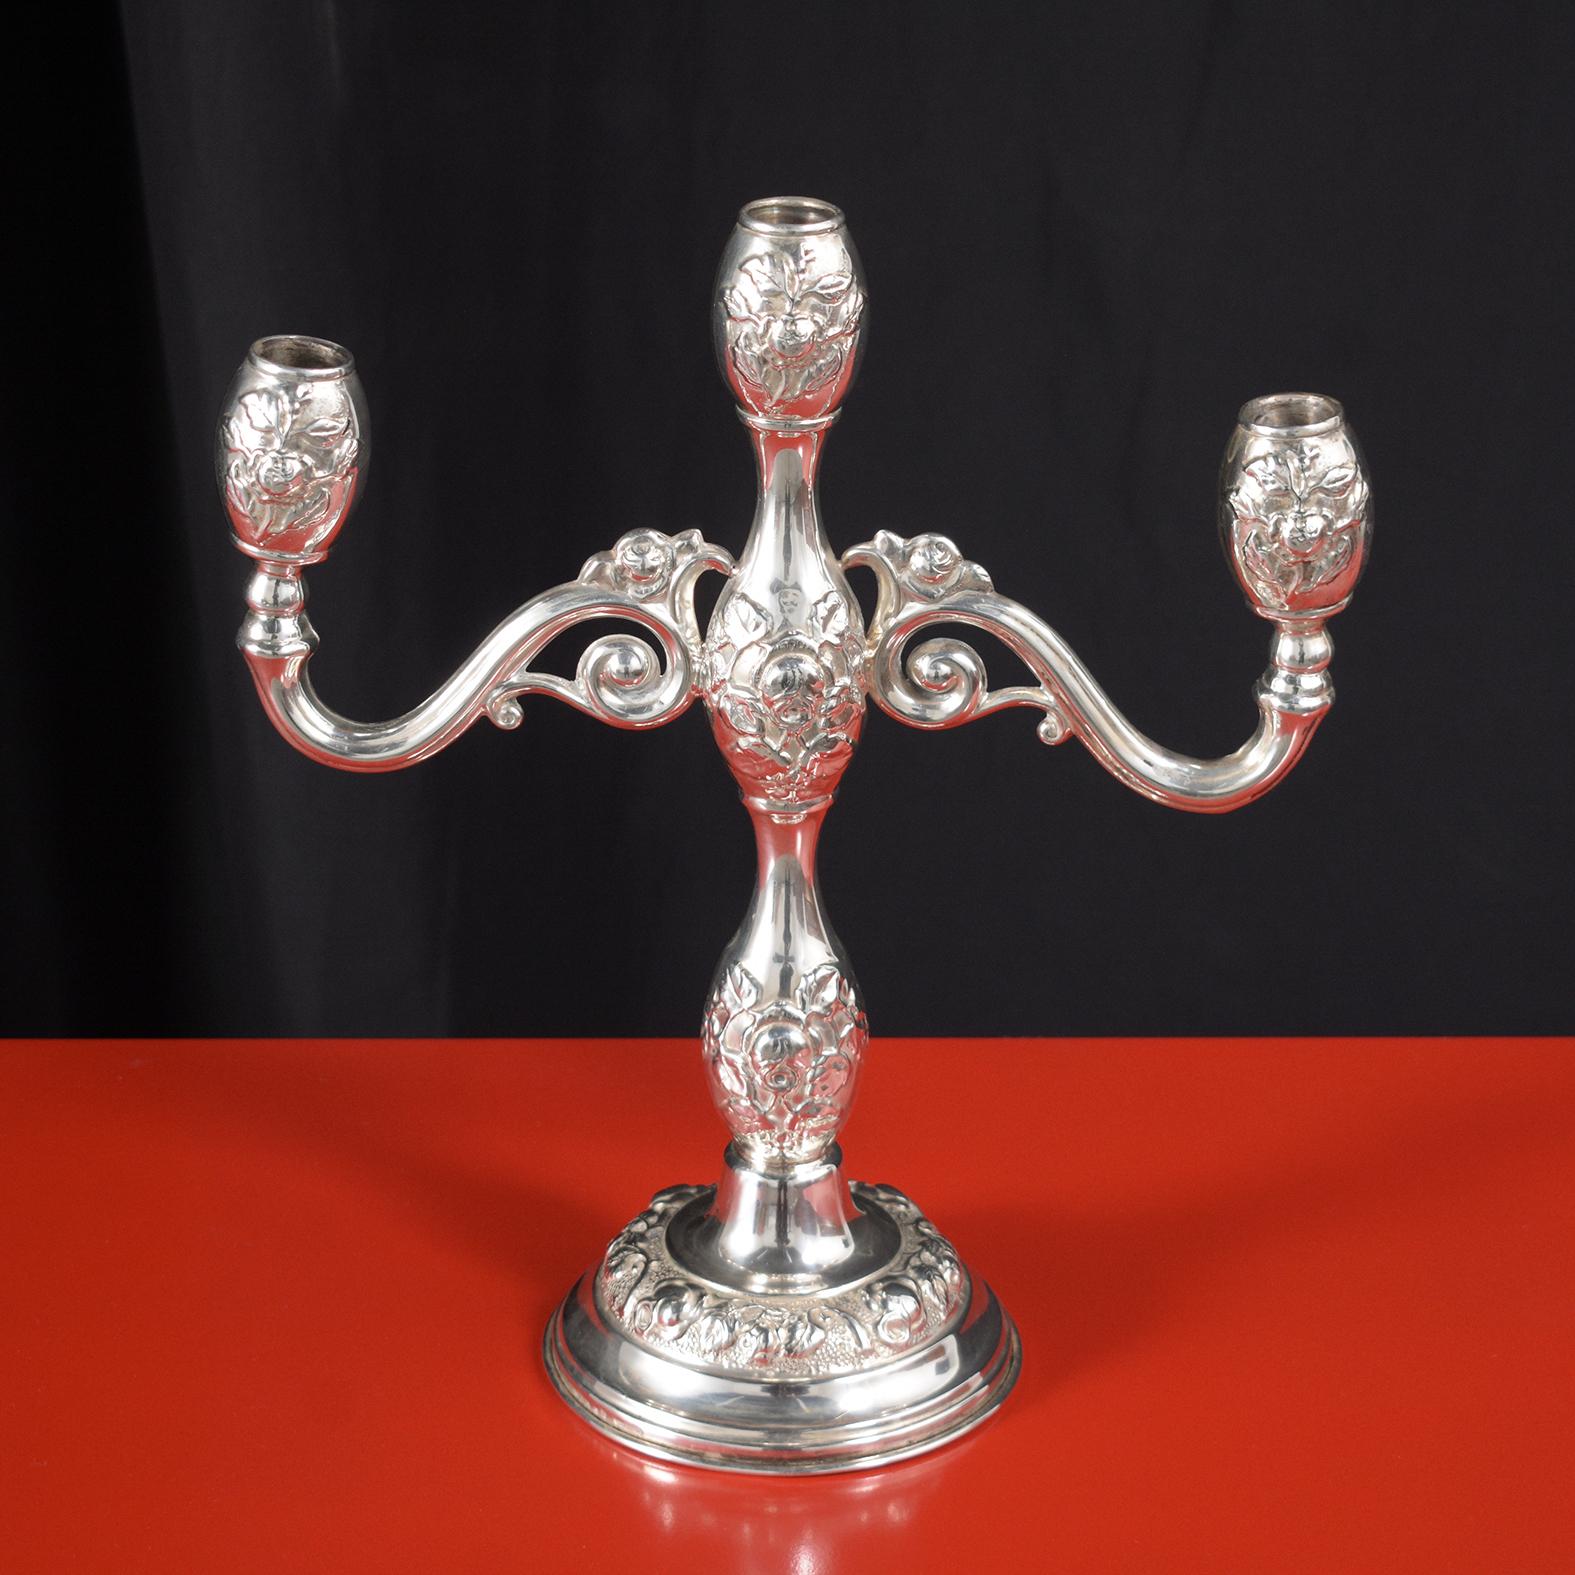 This extraordinary candle holder is in great condition and beautifully crafted out of sterling silver this piece features three arms of beautiful details newly cleaned and polished developing a unique patina finish.